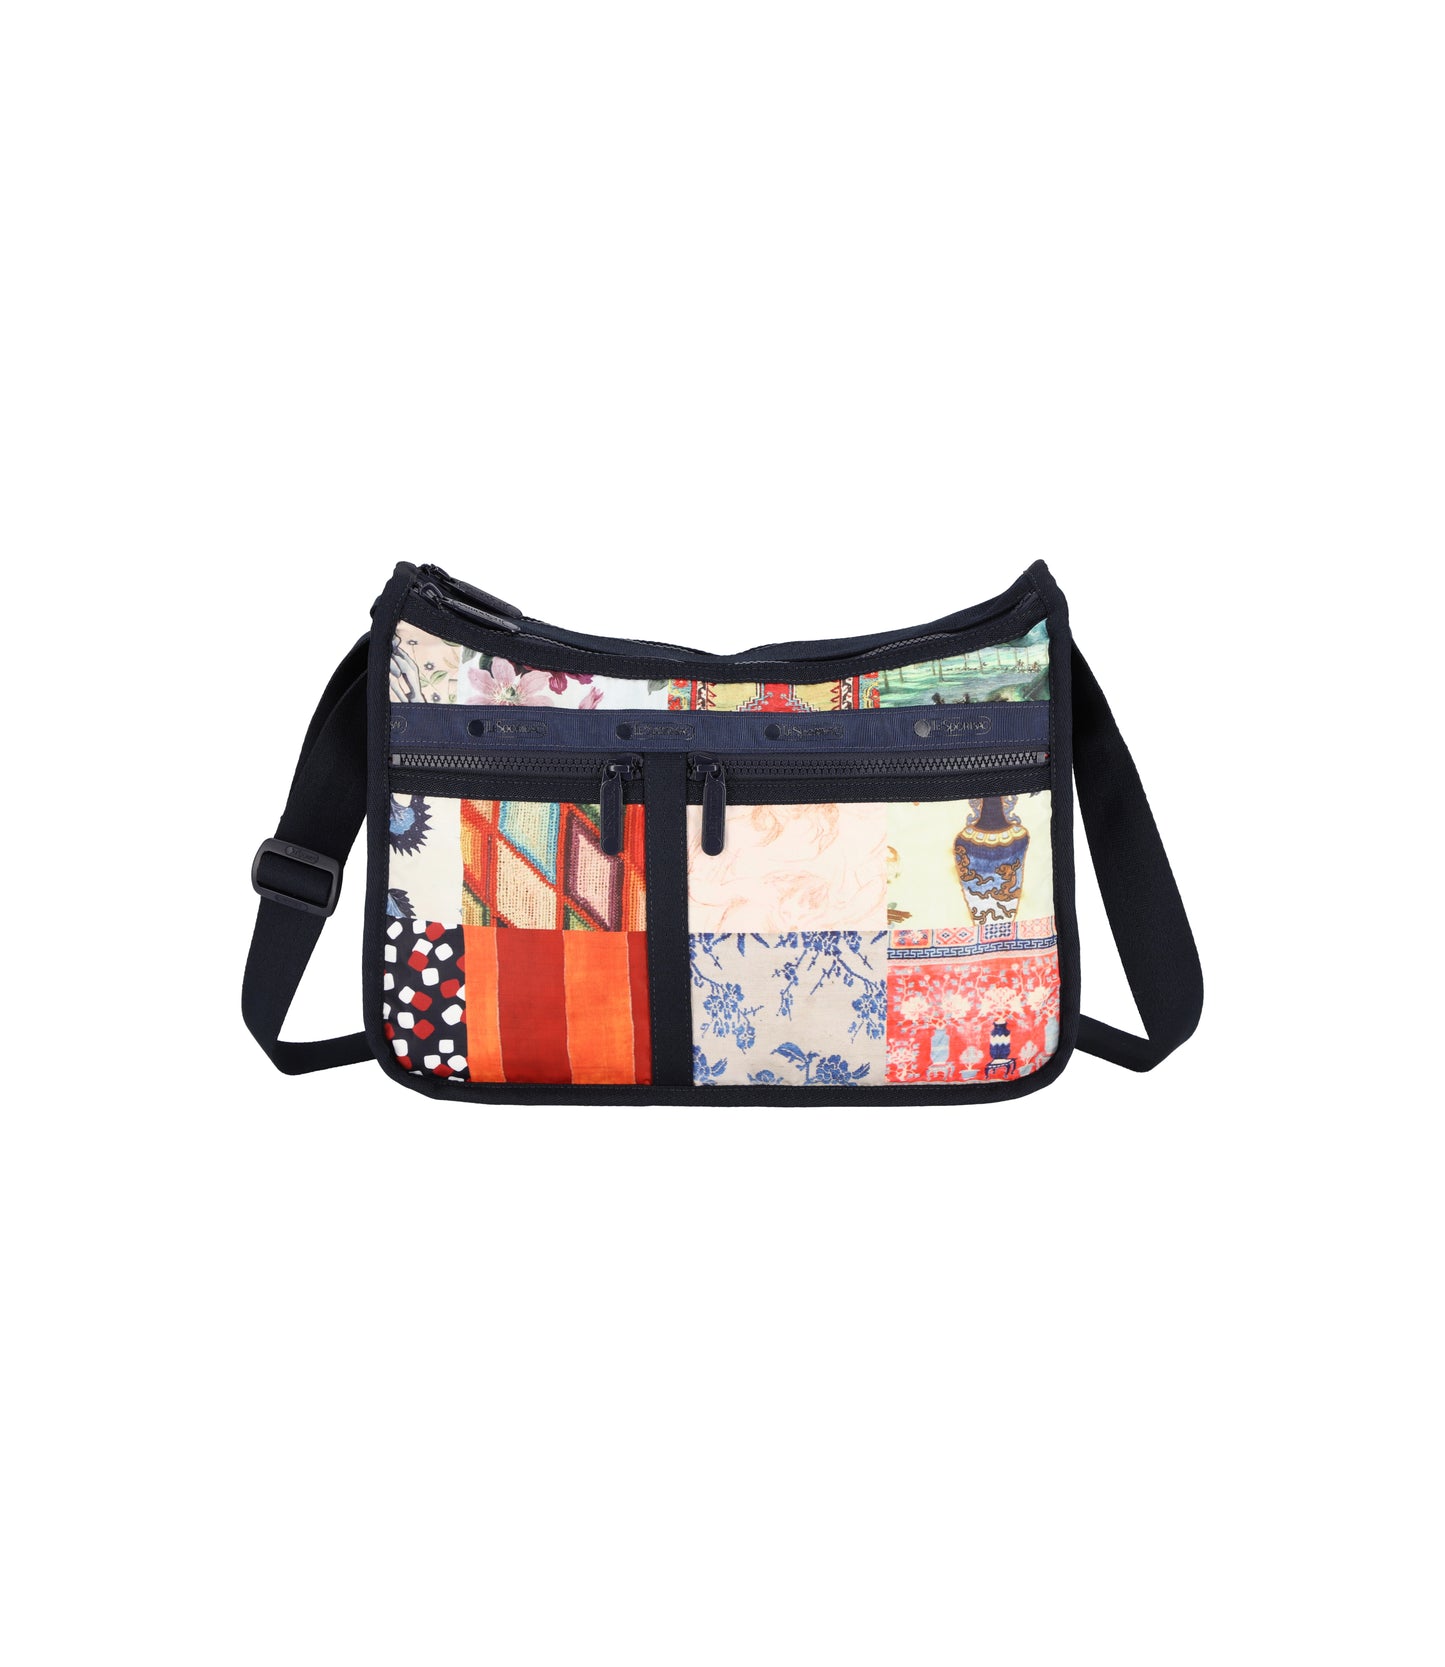 Deluxe Everyday Bag<br>LeSportsac x Libertine Deluxe Everyday